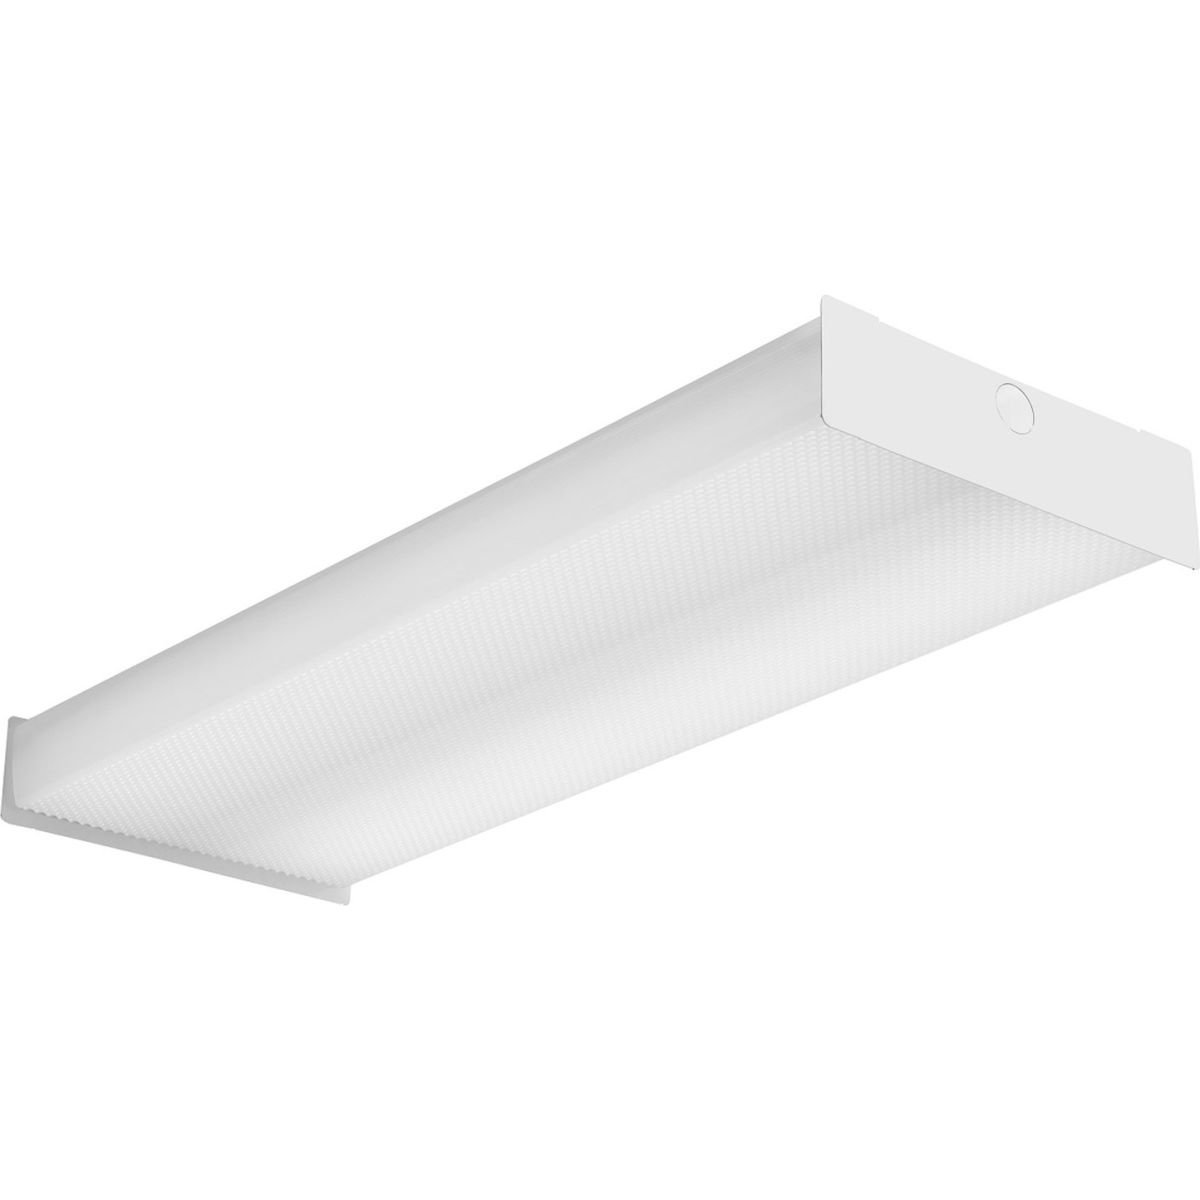 Picture of Acuity Brands B2052169 MVOLT 20L 4000 CCT Lithonia Lighting SBL2 LP840 2 ft. LED Square-Basket Wraparound